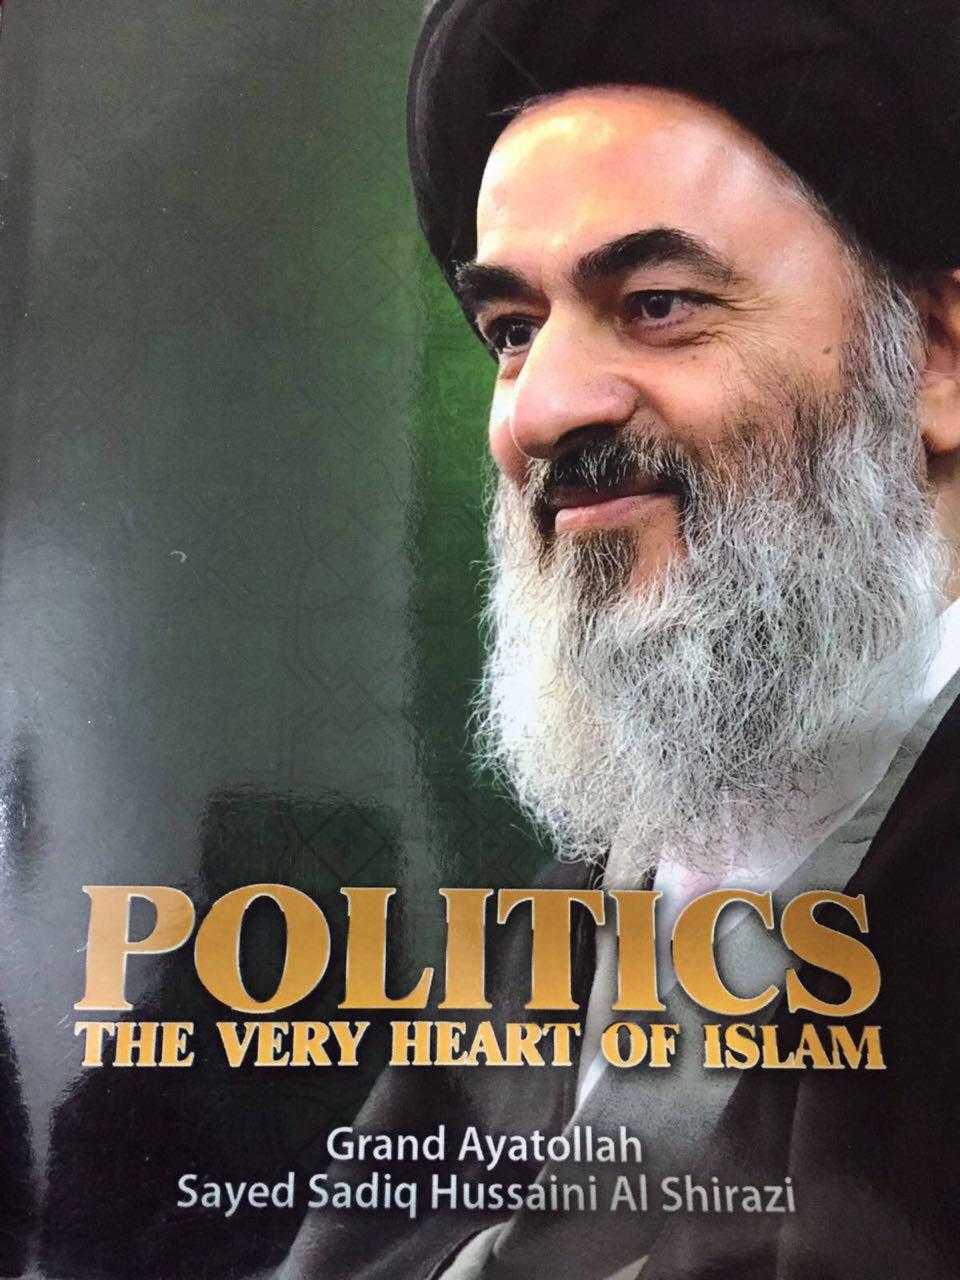 Photo of Translation of the book ‘Politics from the Realty of Islam’ published